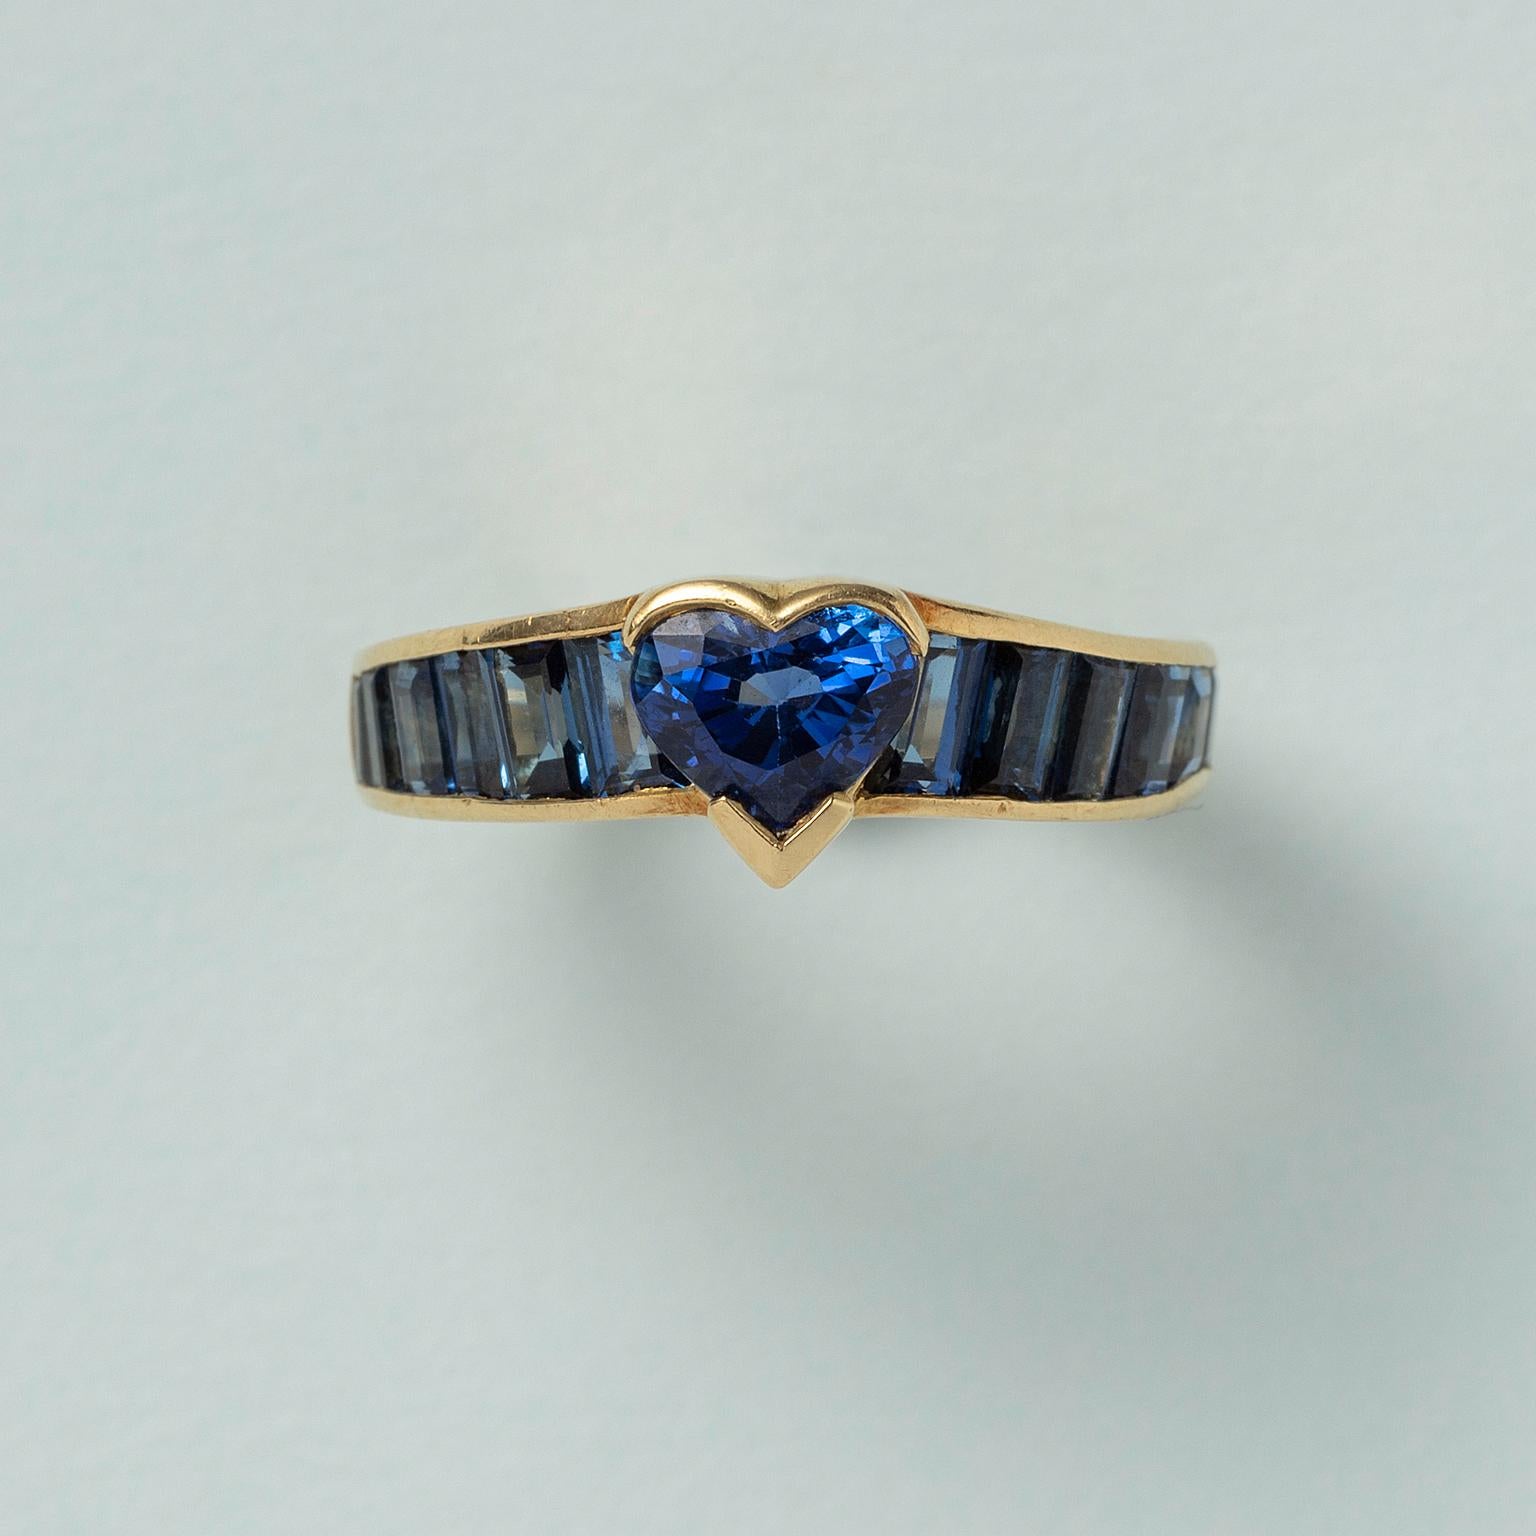 An 18 carat yellow gold ring set with a heart cut aapphire in the center with six baguette cut sapphires on each side, descending in size, France.

weight: 4.46 g
size: 14.75 mm / 4 US
width: 2.2 - 6.5 mm